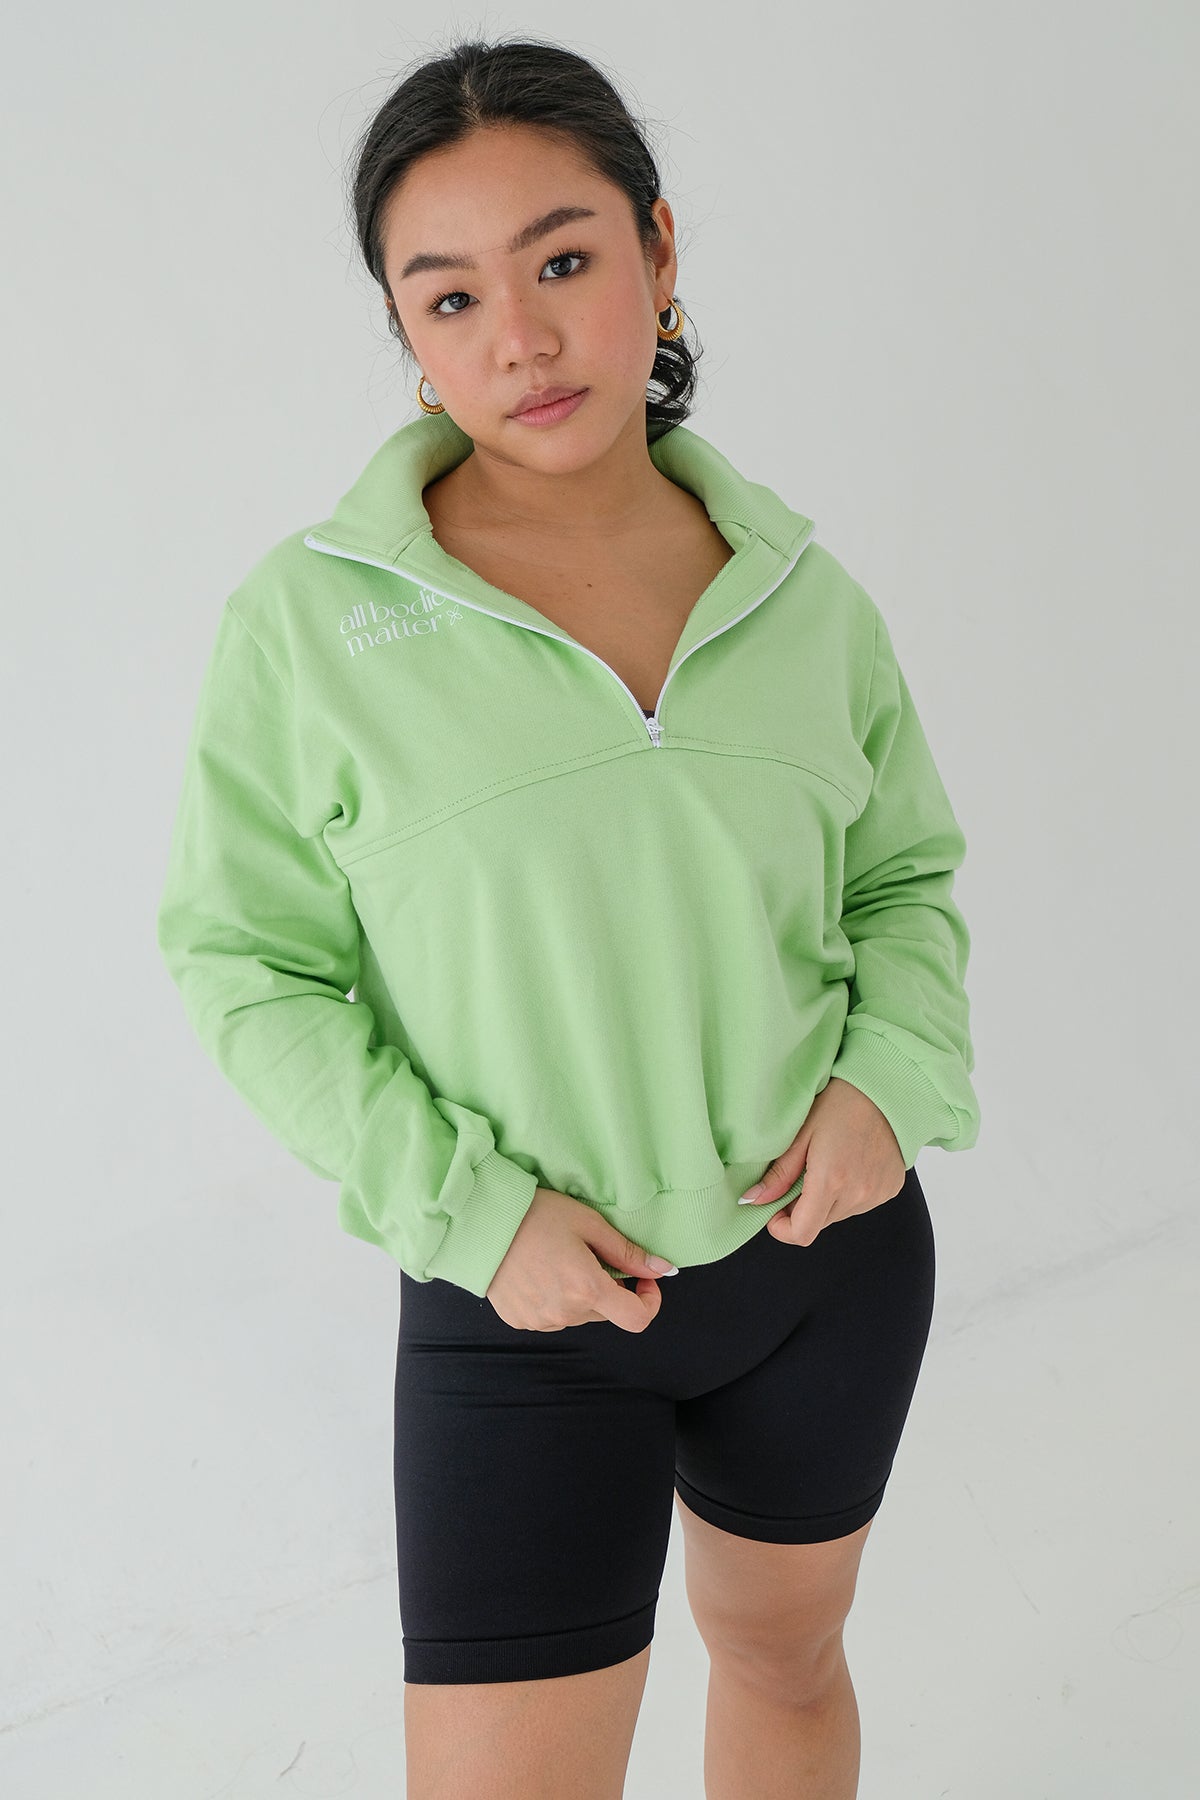 All Bodies Matter Sweater In Lime